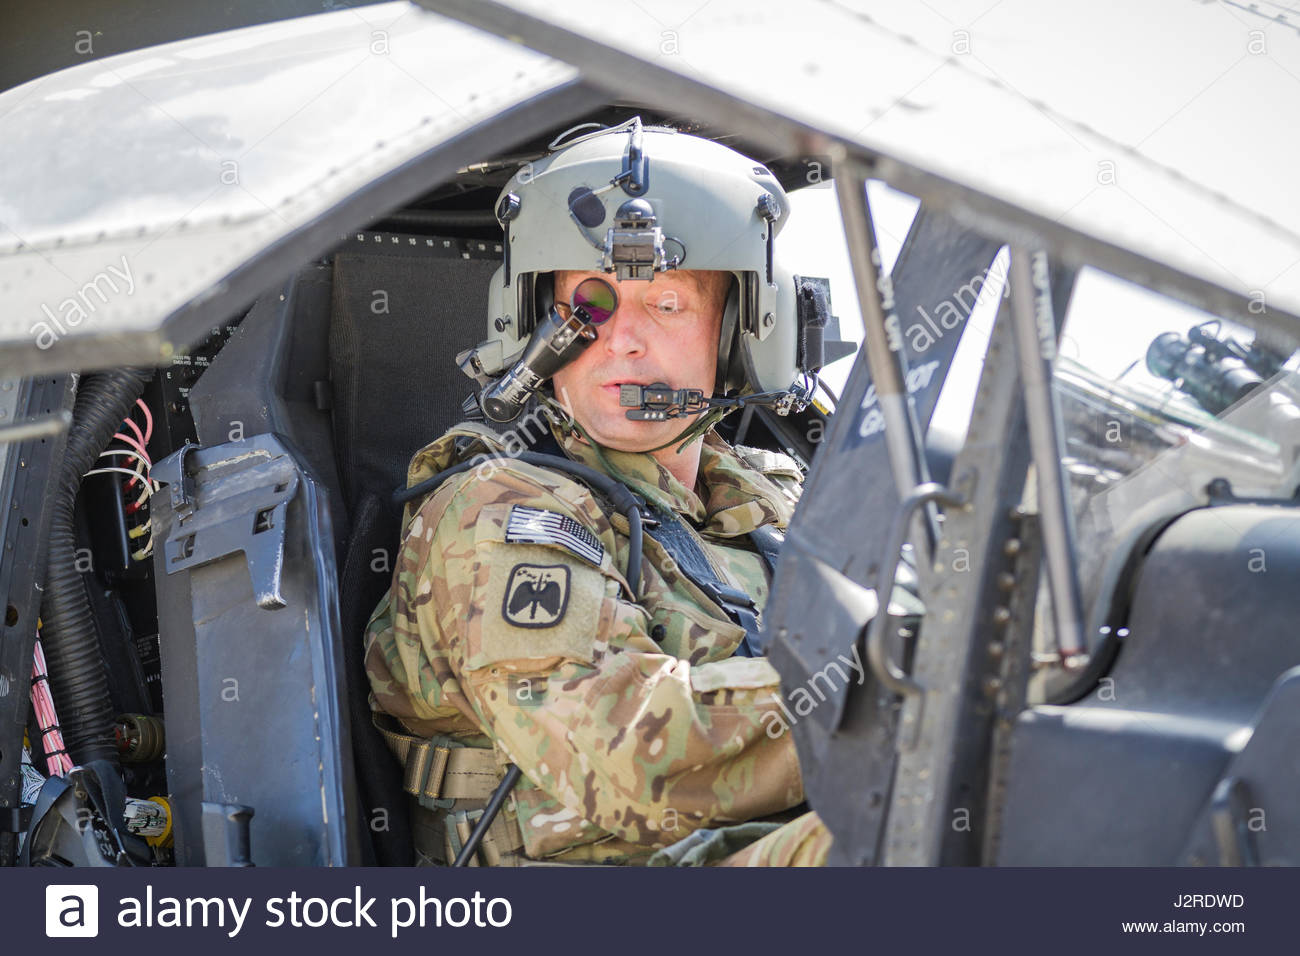 a-us-army-ah-64e-apache-helicopter-pilot-assigned-to-task-force-tigershark-J2RDWD.jpg